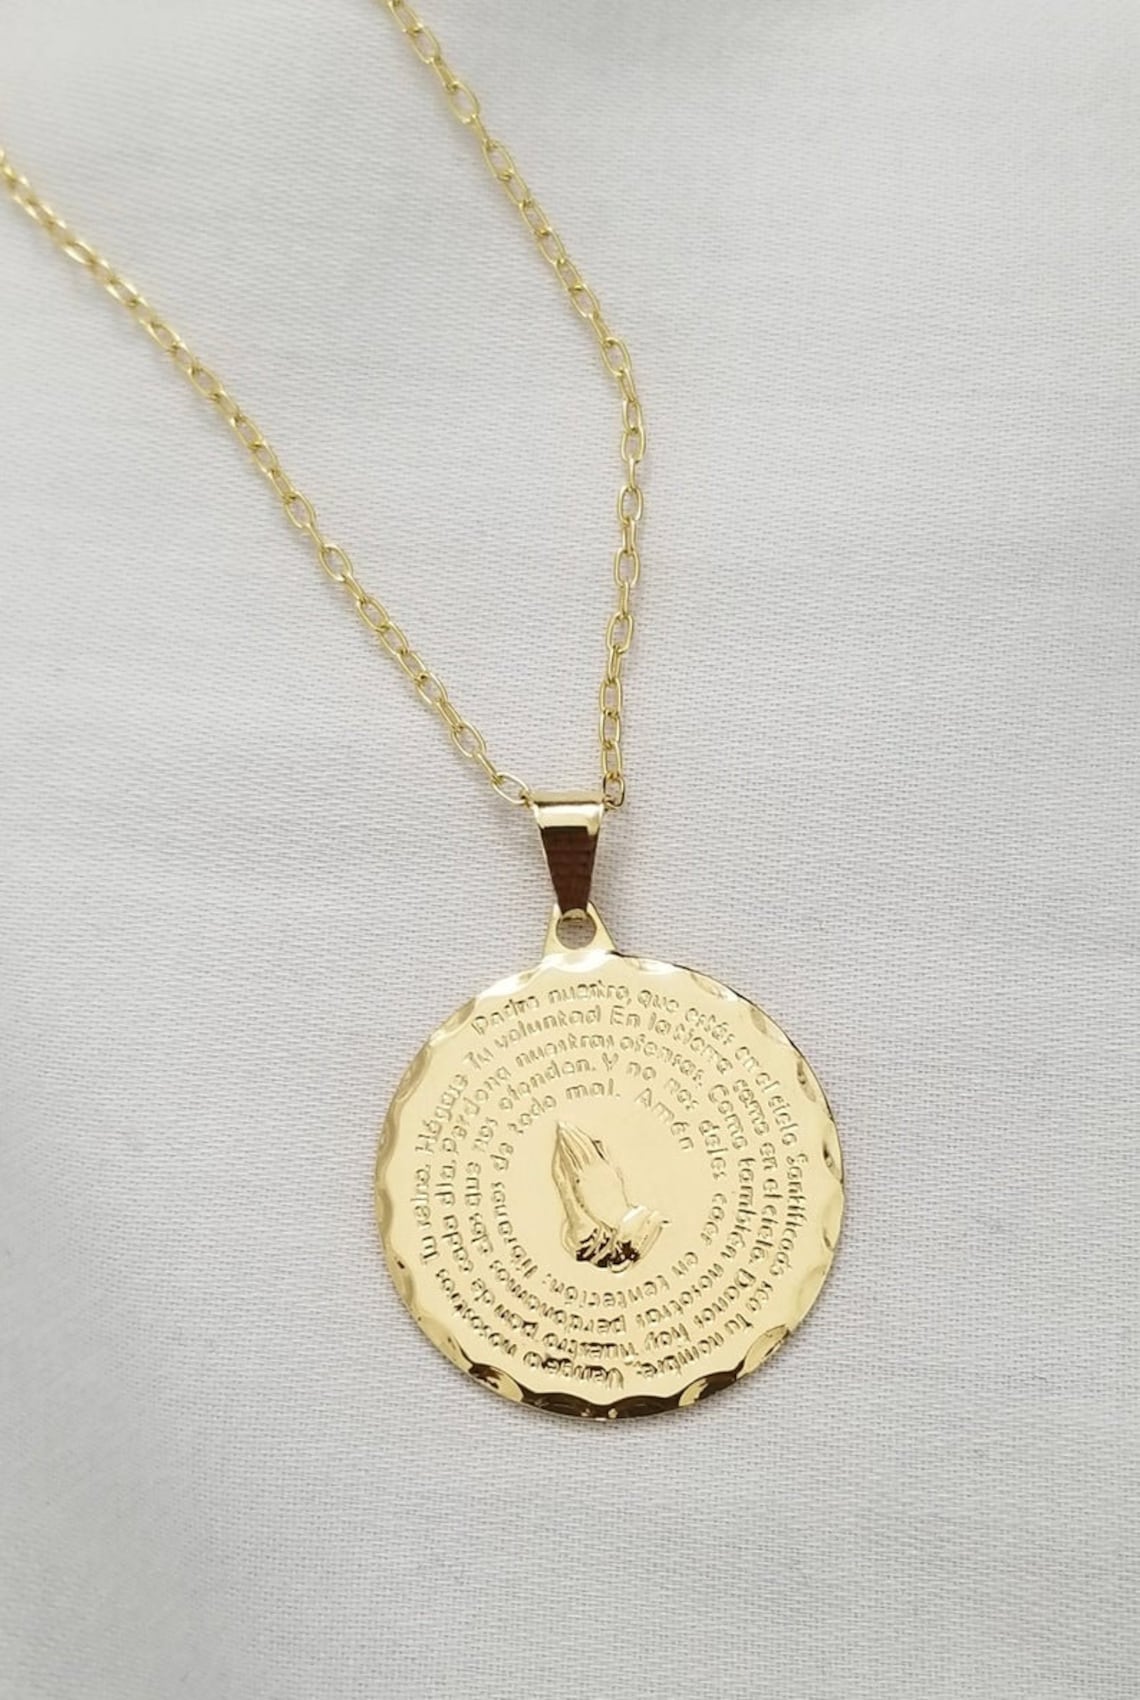 Gold Medallion Necklace 18kt Gold Necklace Gold Coin Necklace | Etsy